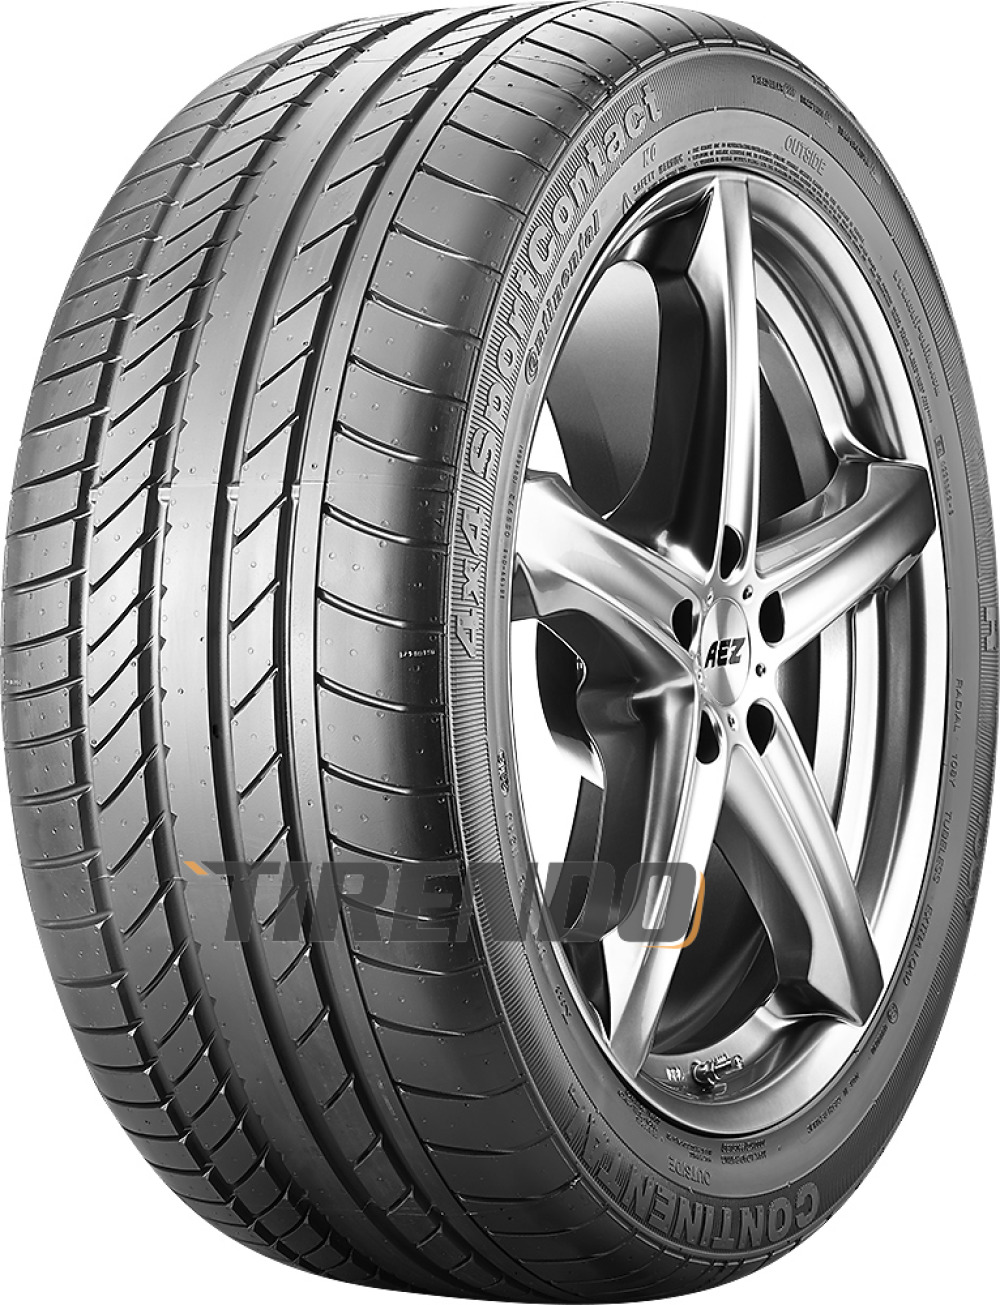 Image of Continental 4X4 SportContact ( 275/40 R20 106Y XL N0 )